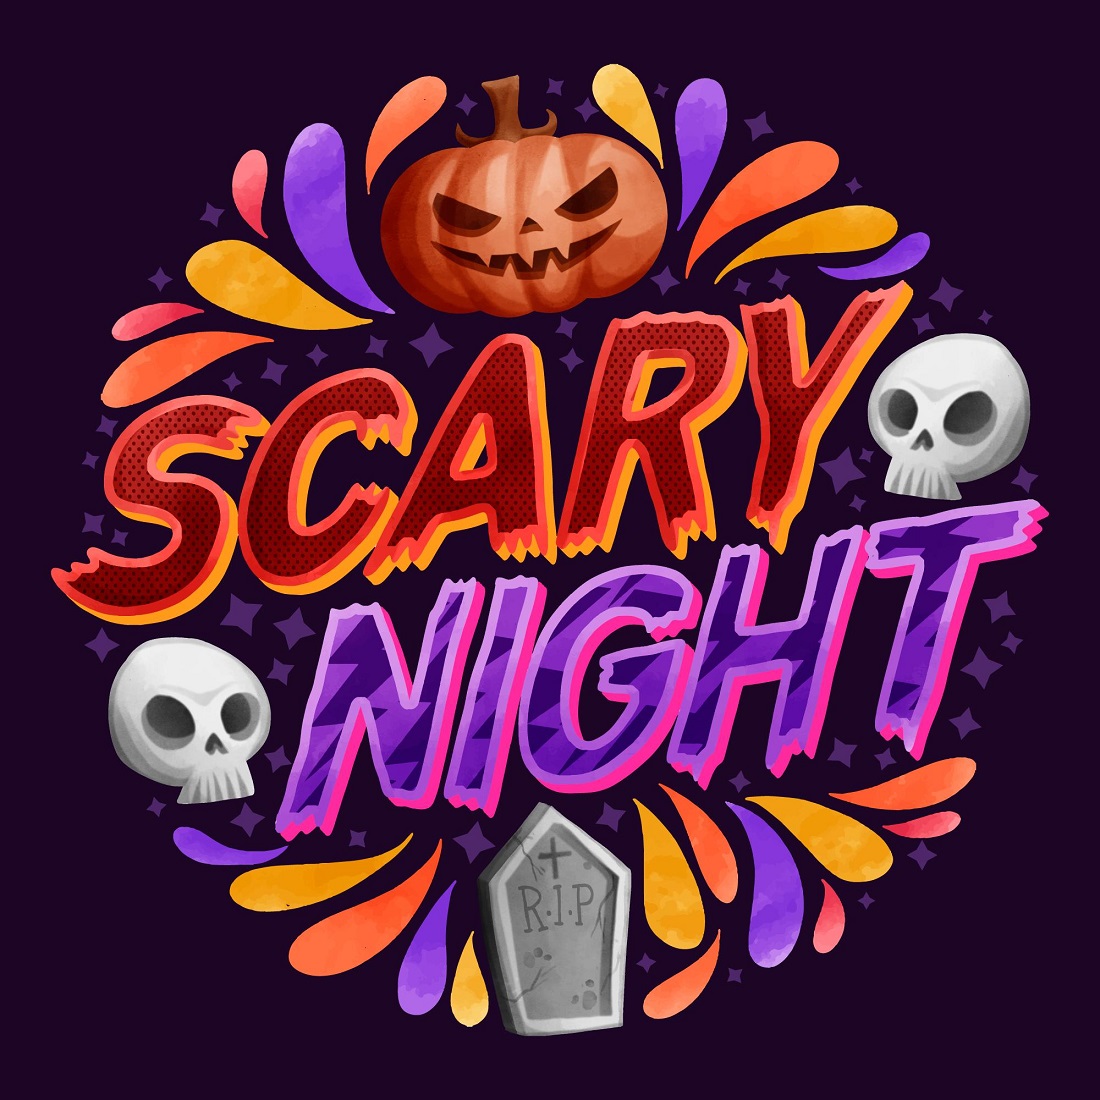 Scary night lettering preview image.